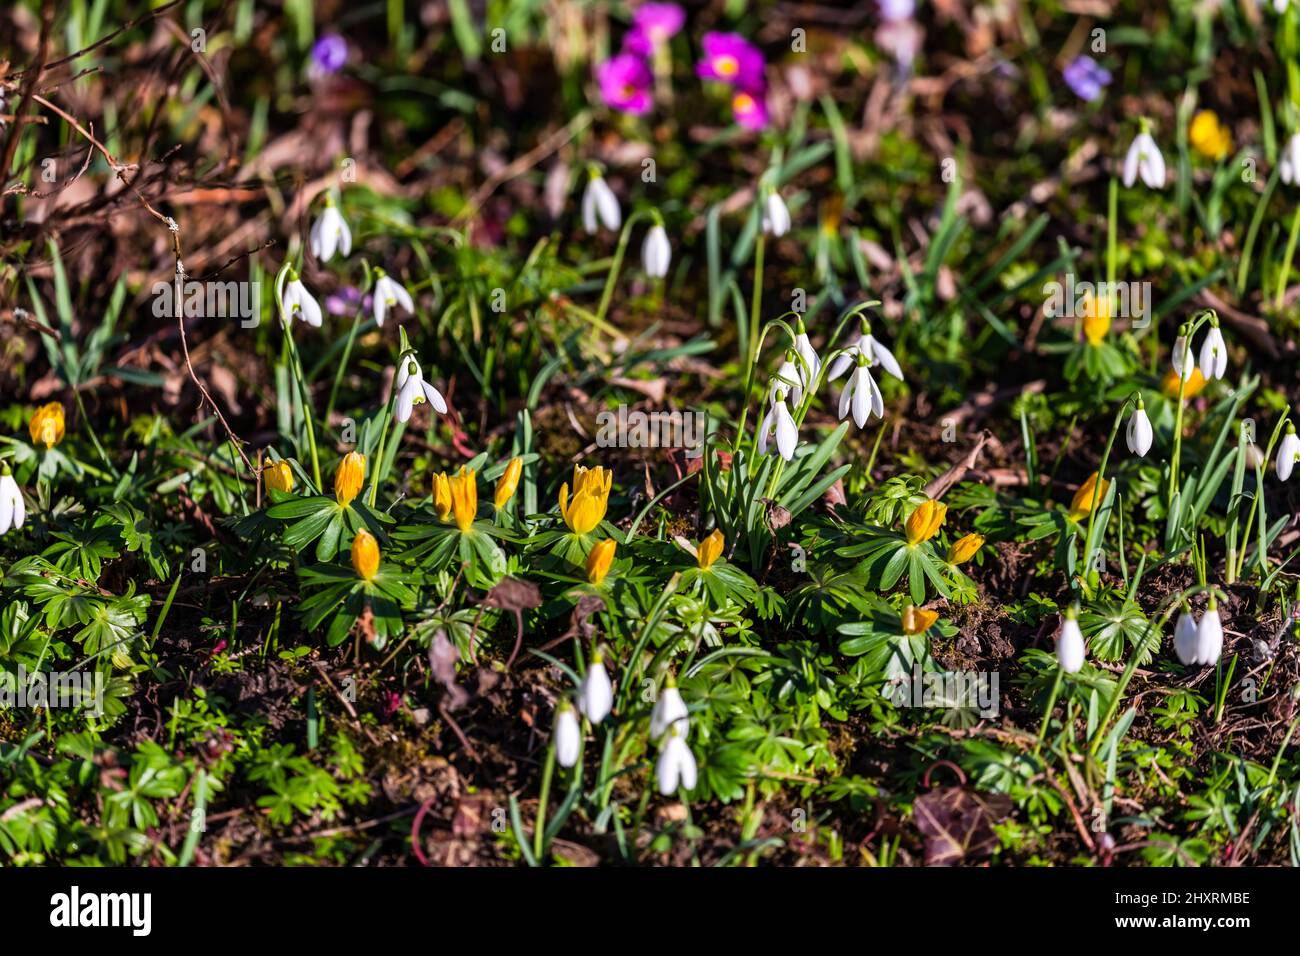 Primula, snowdrops and other early bloomers herald spring at the end of February in Germany Stock Photo